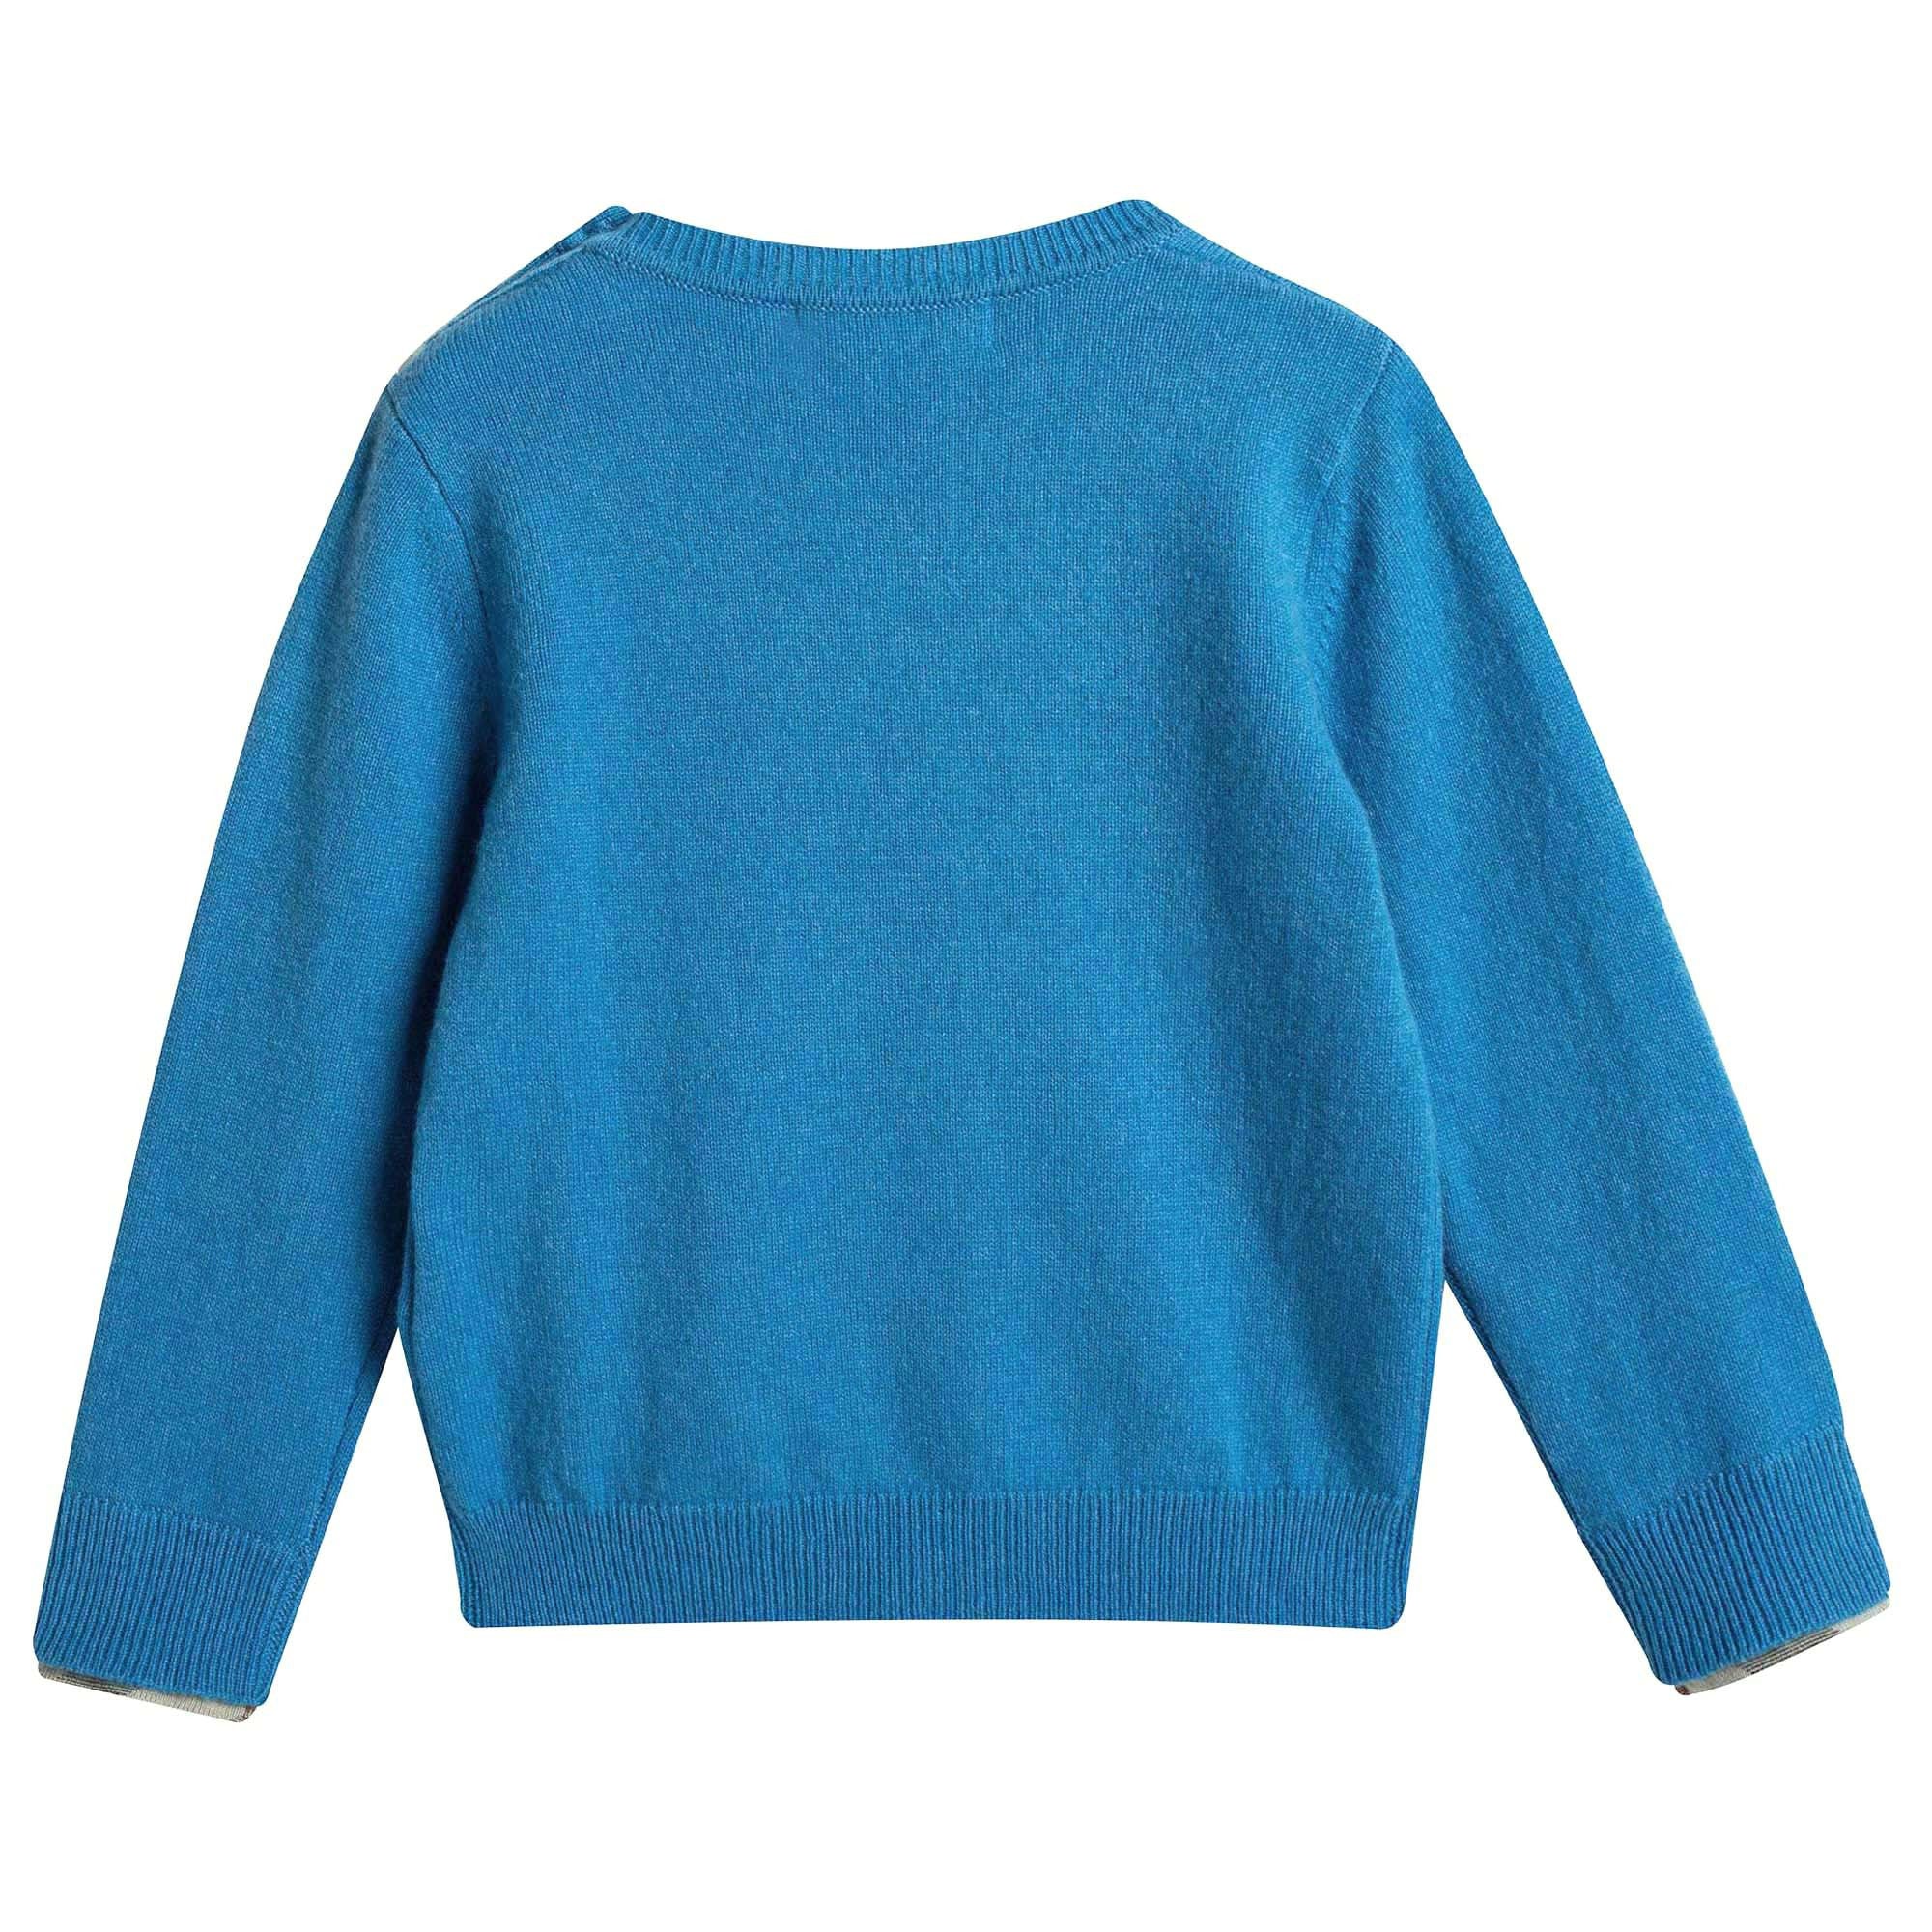 Baby Boys Light Blue Cashmere Knitted Sweater - CÉMAROSE | Children's Fashion Store - 7